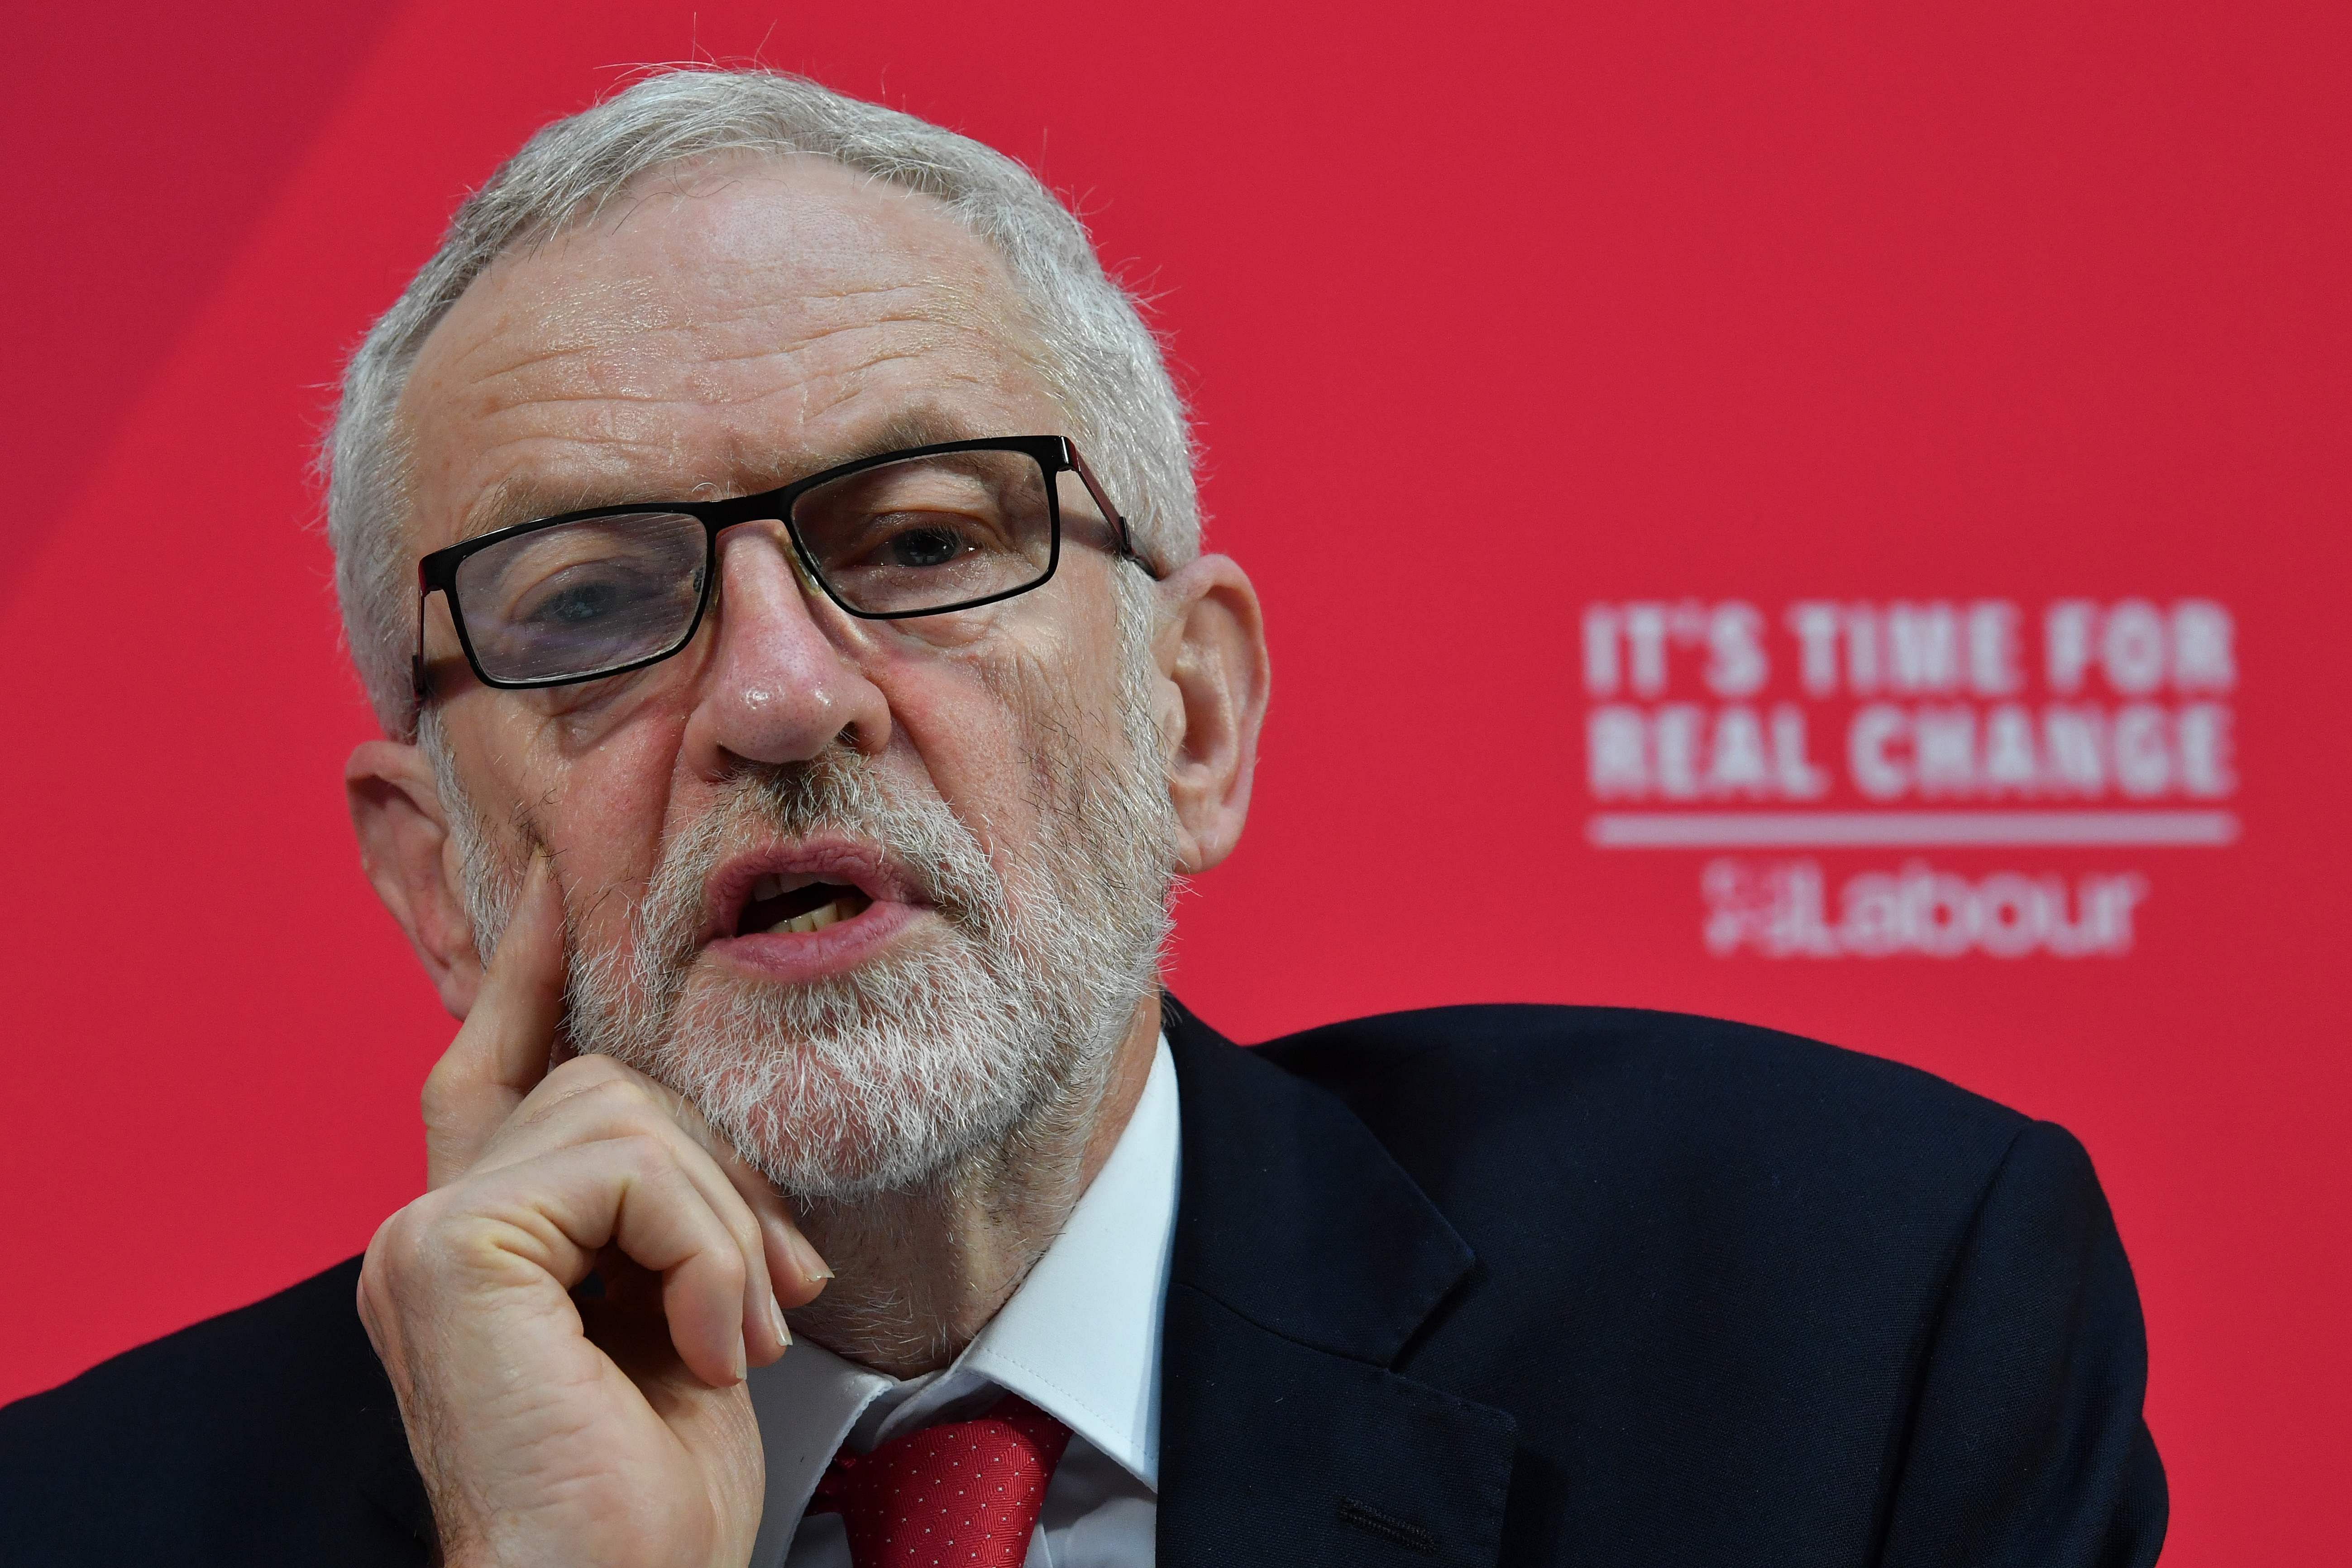 Opposition Labour party leader Jeremy Corbyn gives a press conference in London. (AFP Photo)